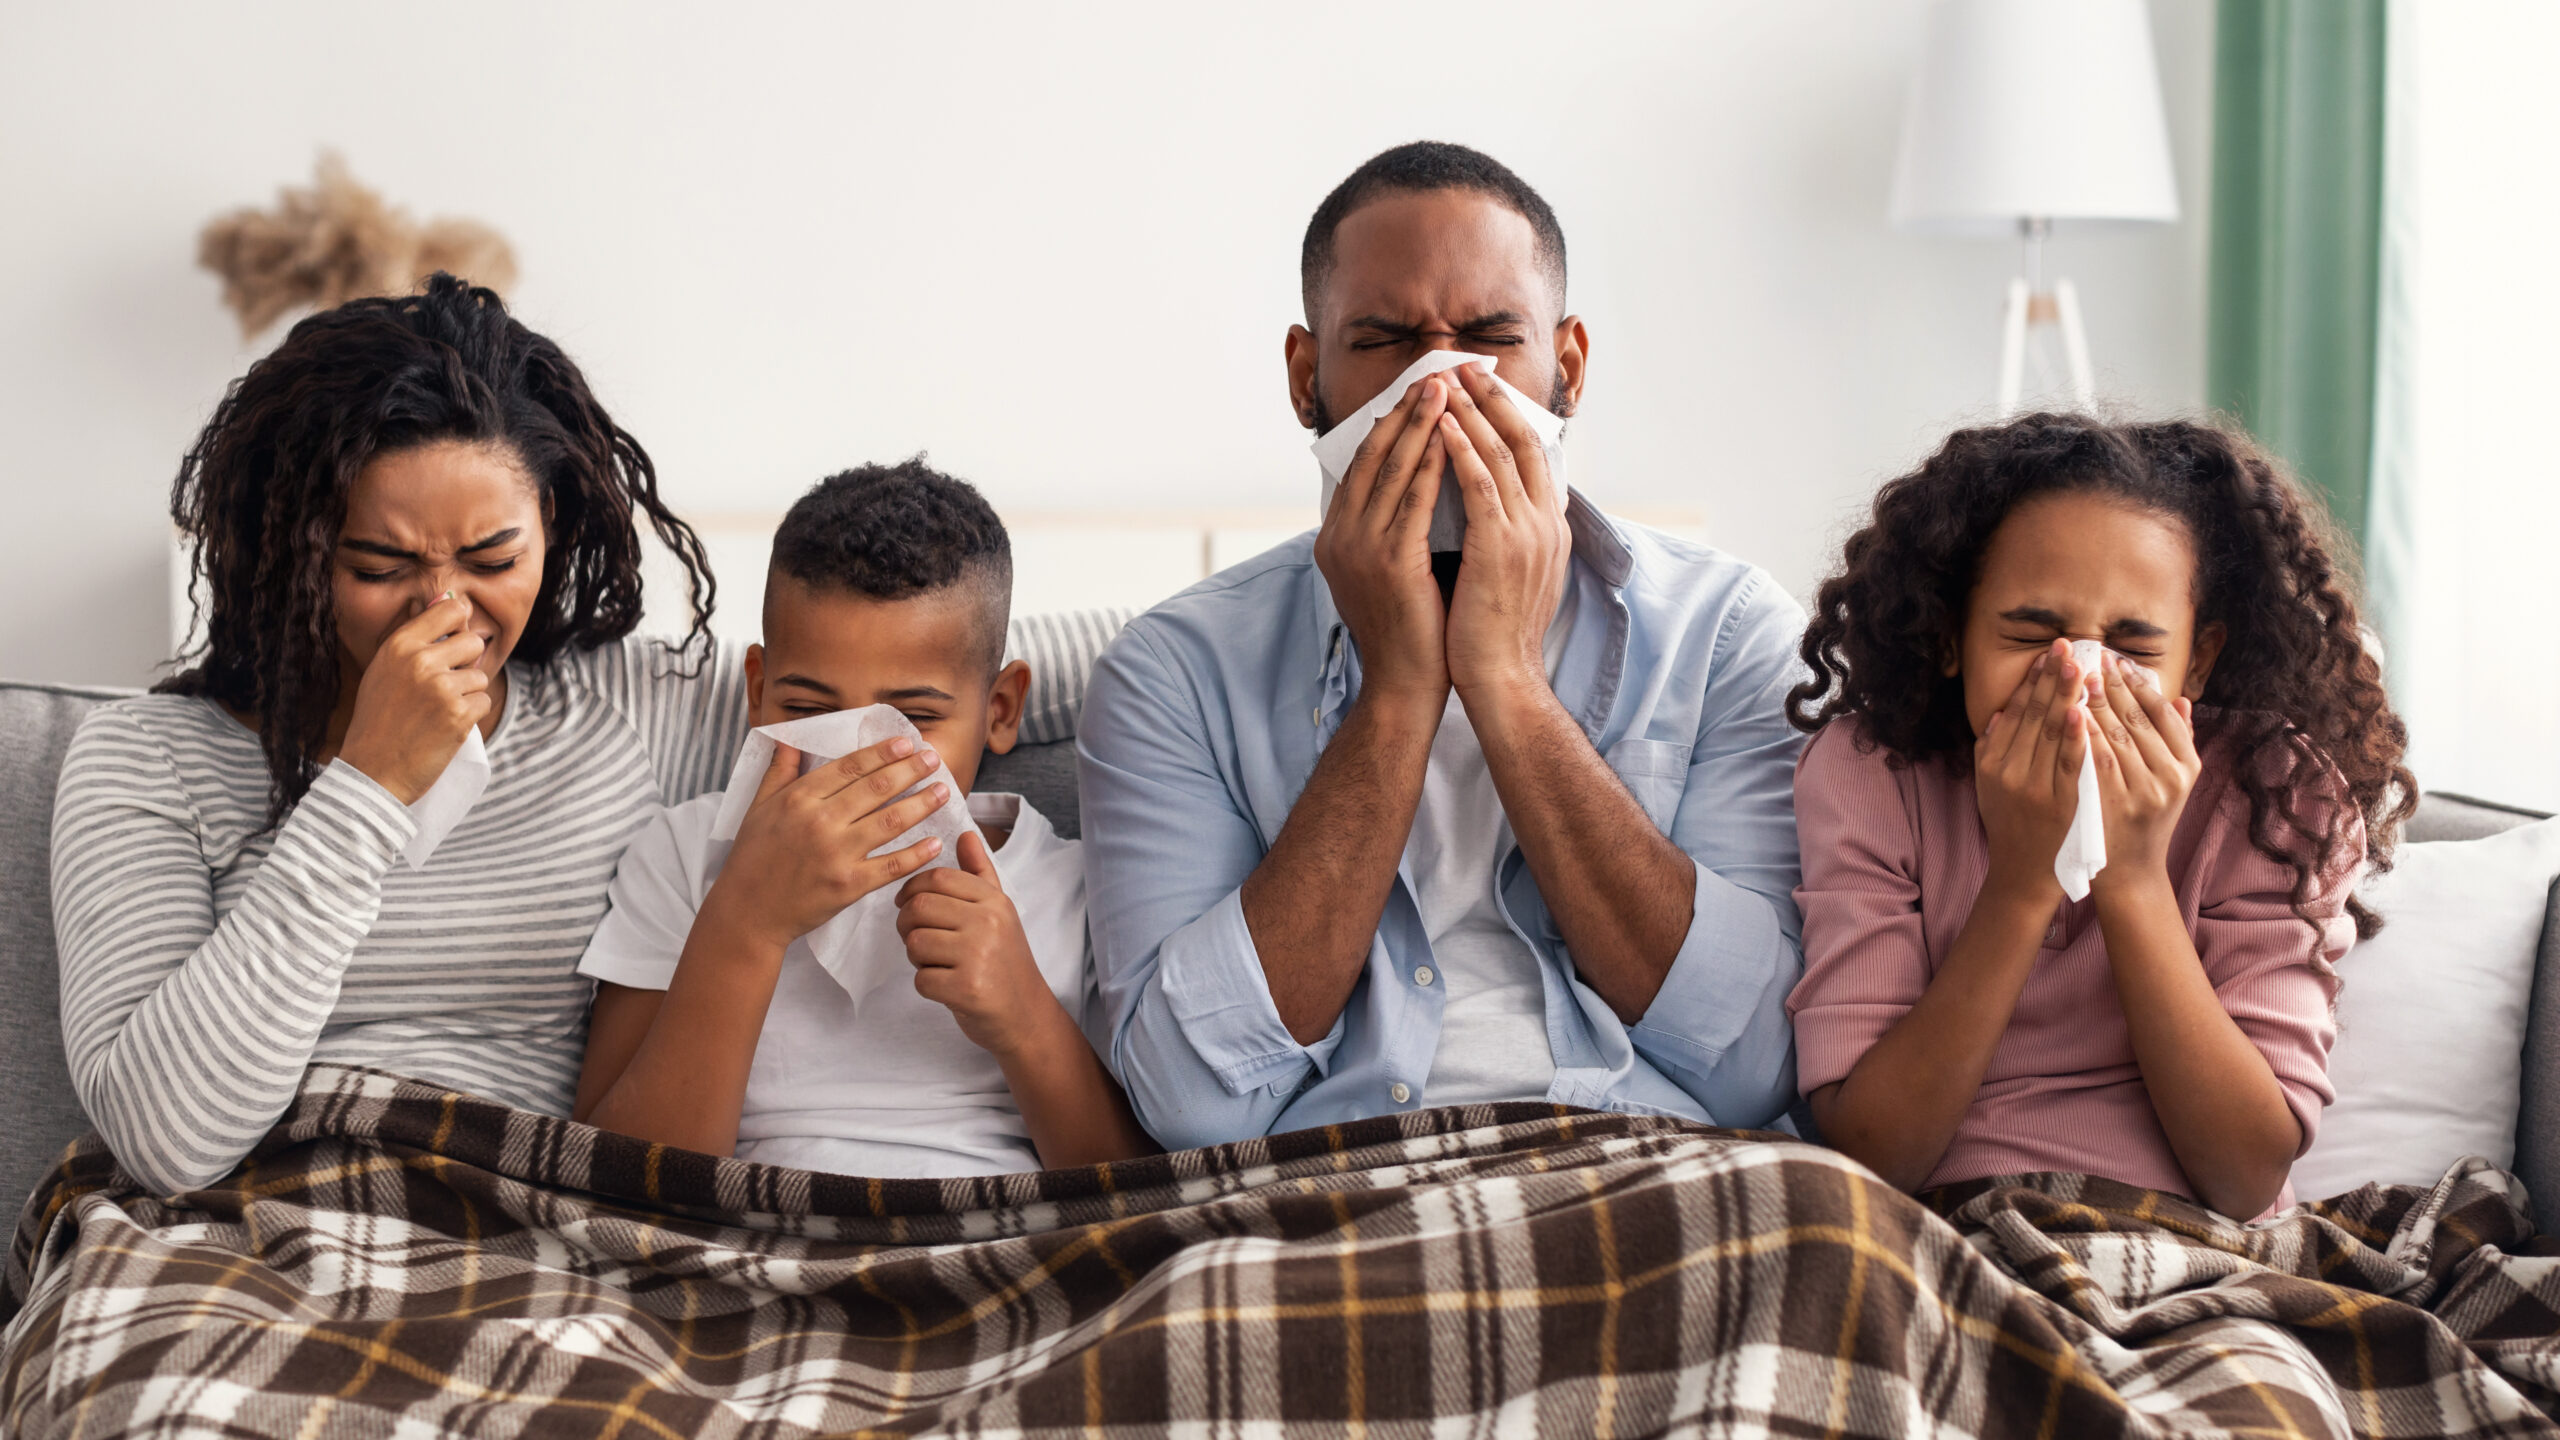 Portrait of sick young black family of four people blowing runny noses while sitting together on the sofa with napkins and covered with blanket. African American parents and kids suffering from cold